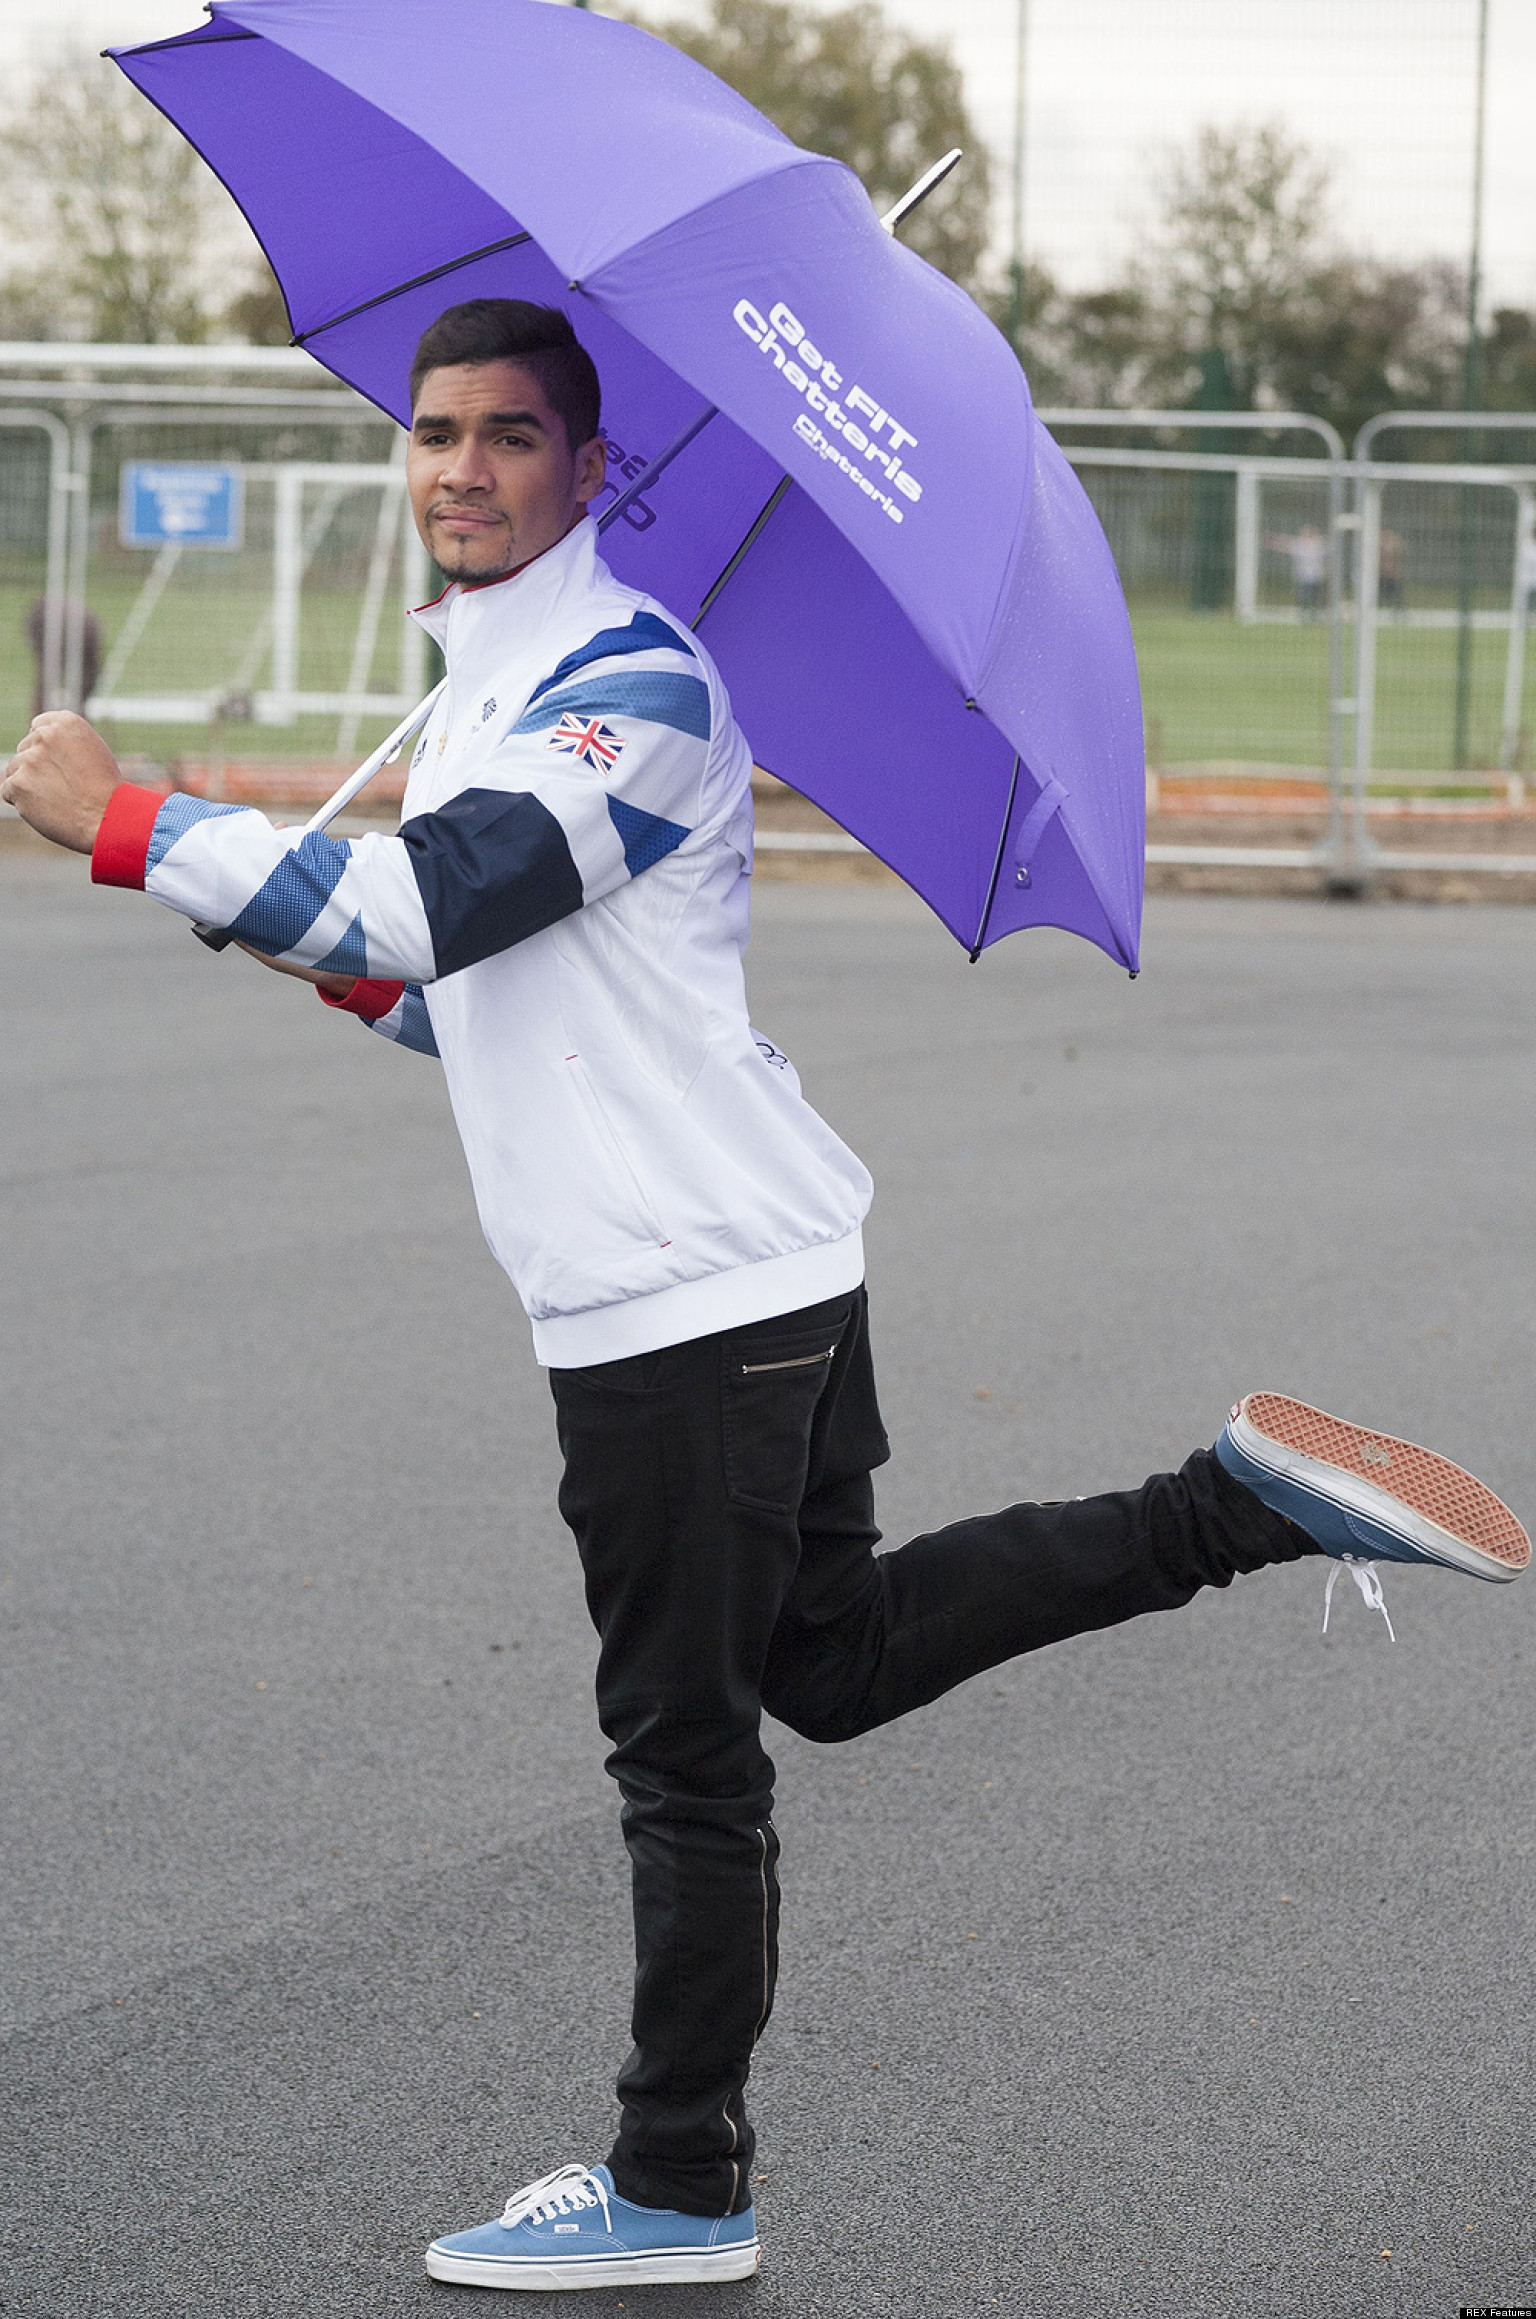 Louis Smith Pulls Some Awkward Poses As He Opens A Leisure Centre (PICS) | HuffPost UK